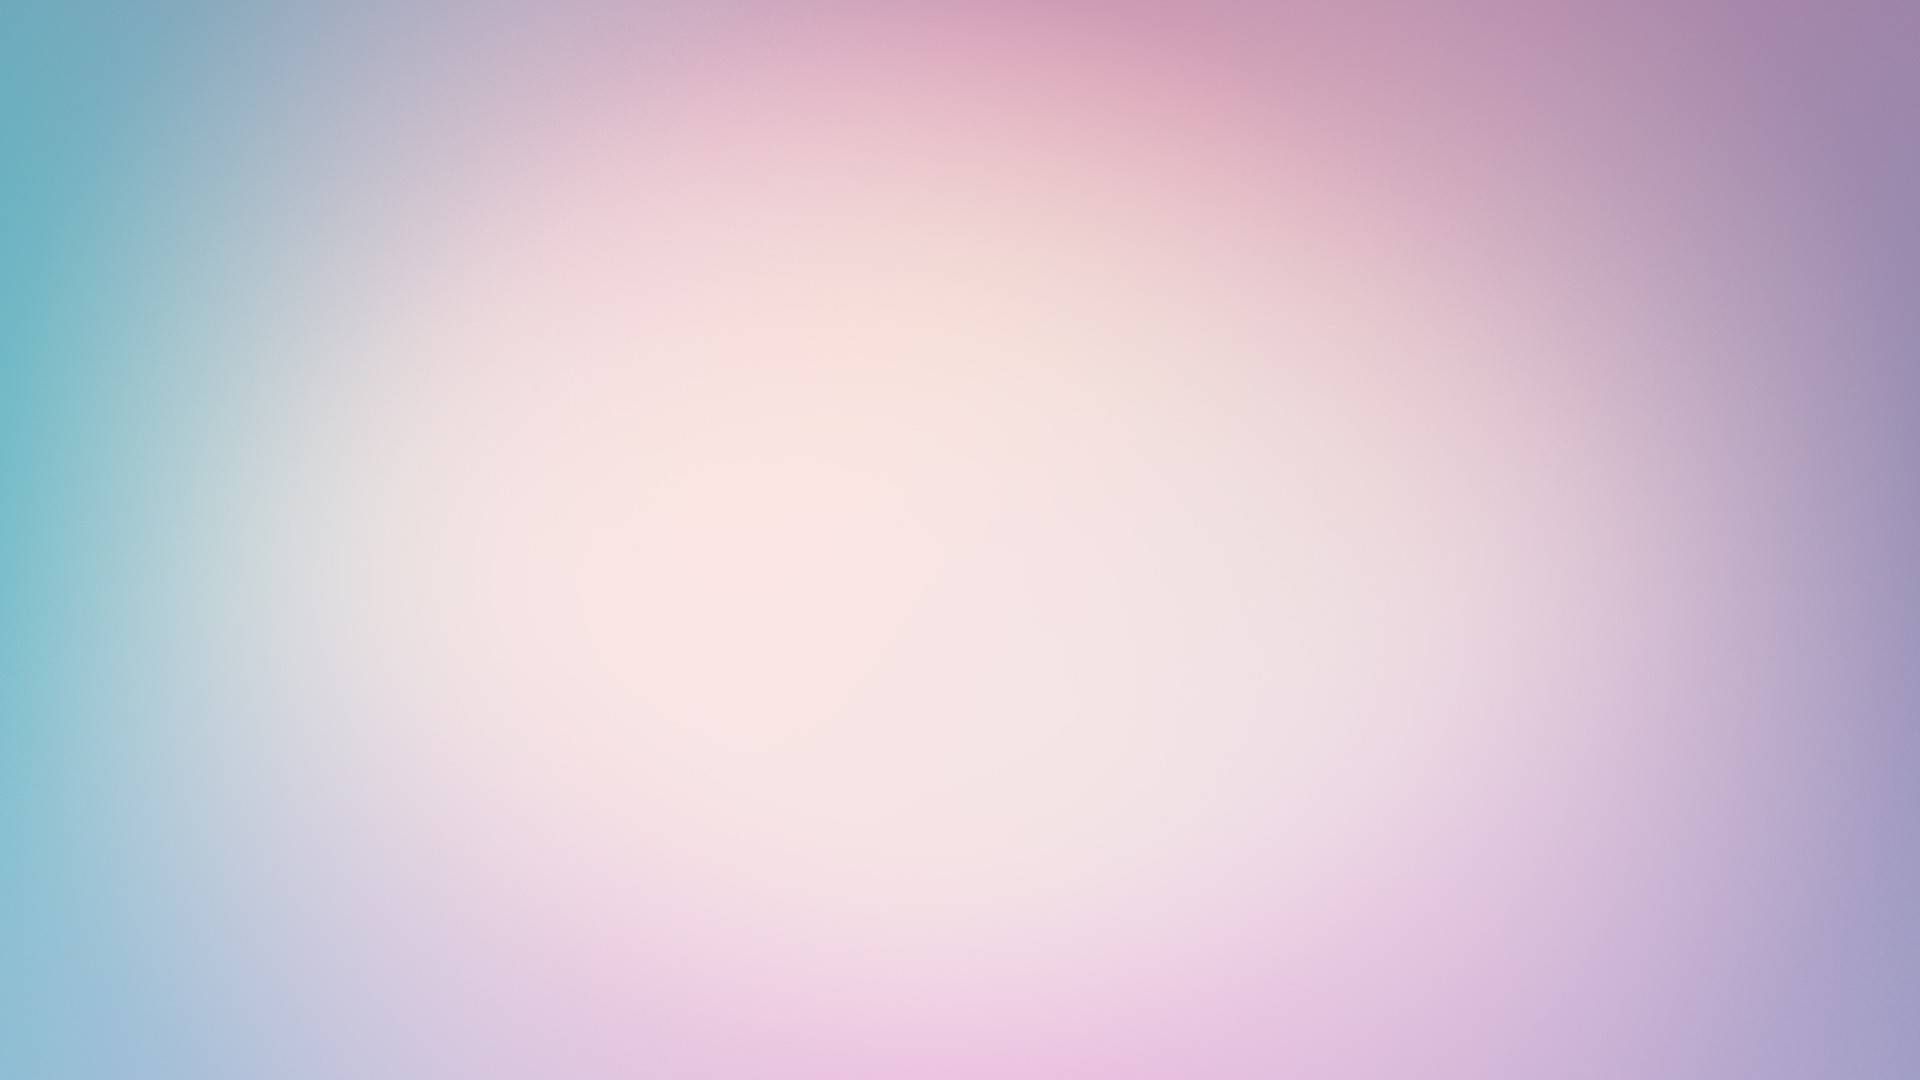 Calm gaussian blur wallpaper - High Quality and other